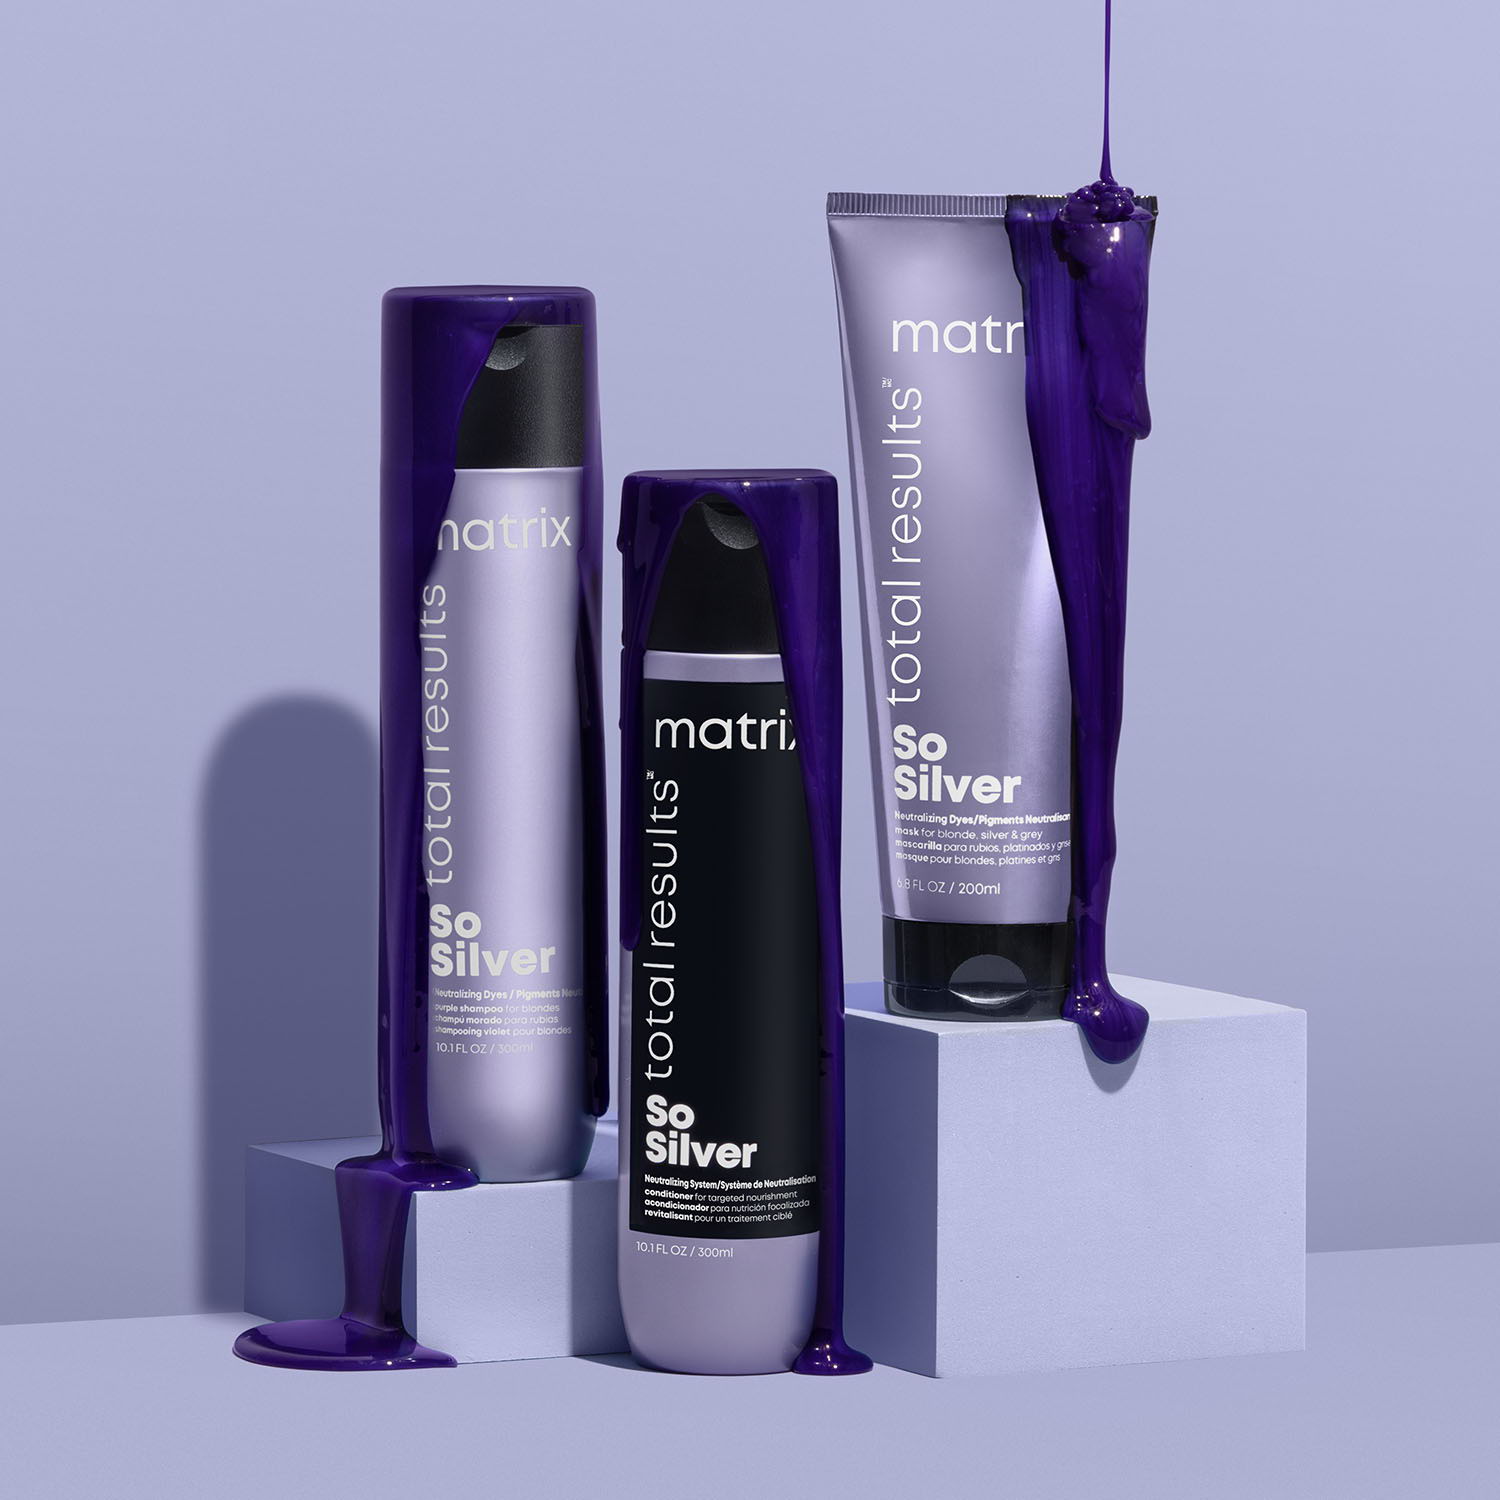 Total Results So Silver Shampoo €13,60*
Total Results So Silver Conditioner €13,60*
Total Results So Silver Mask €19,55*